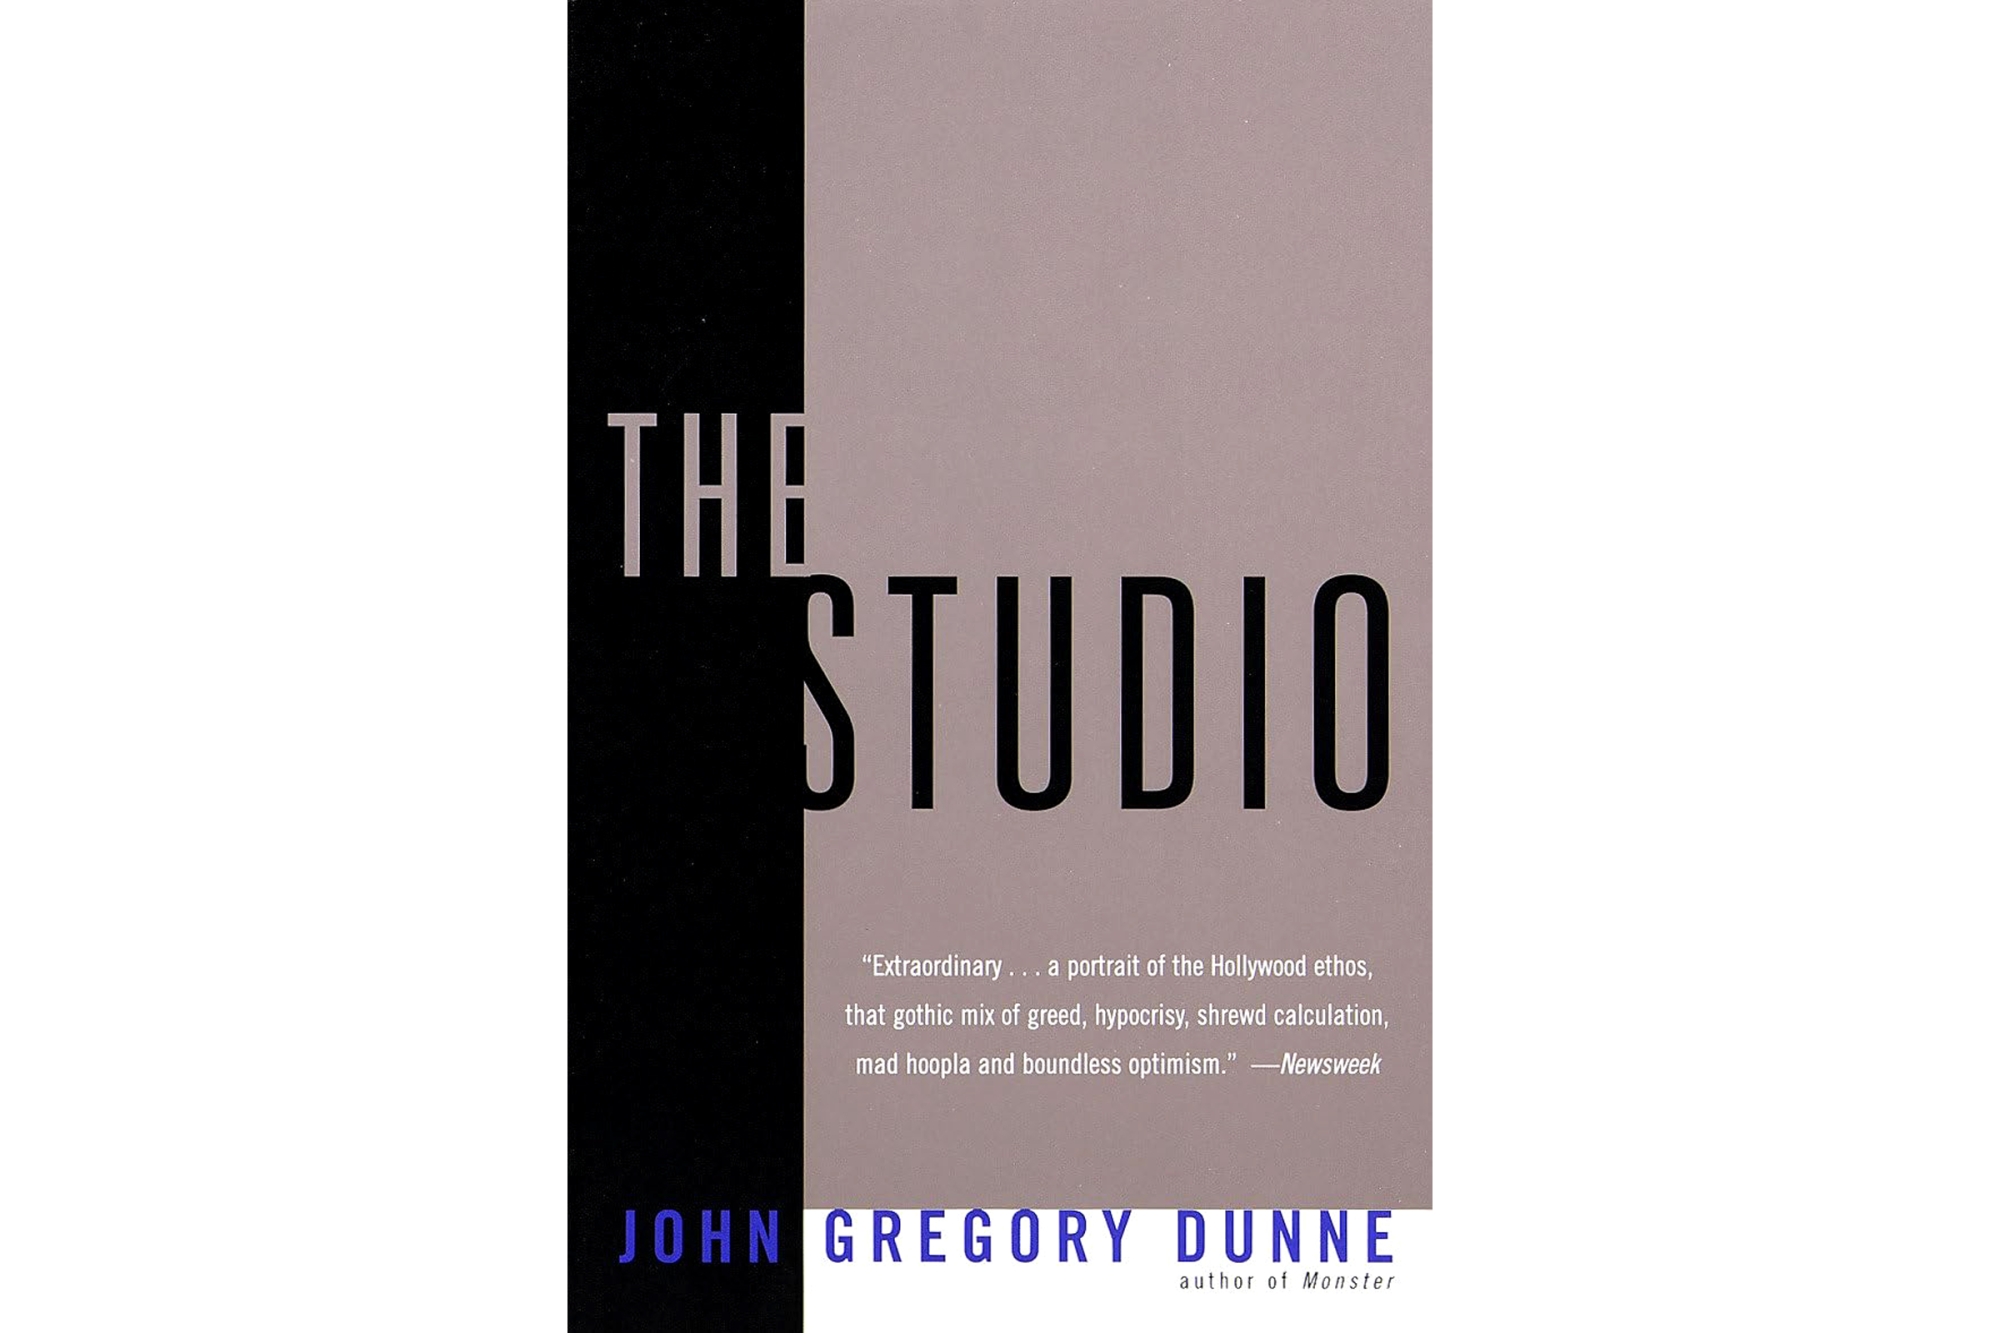 "The Studio" by John Gregory Dunne